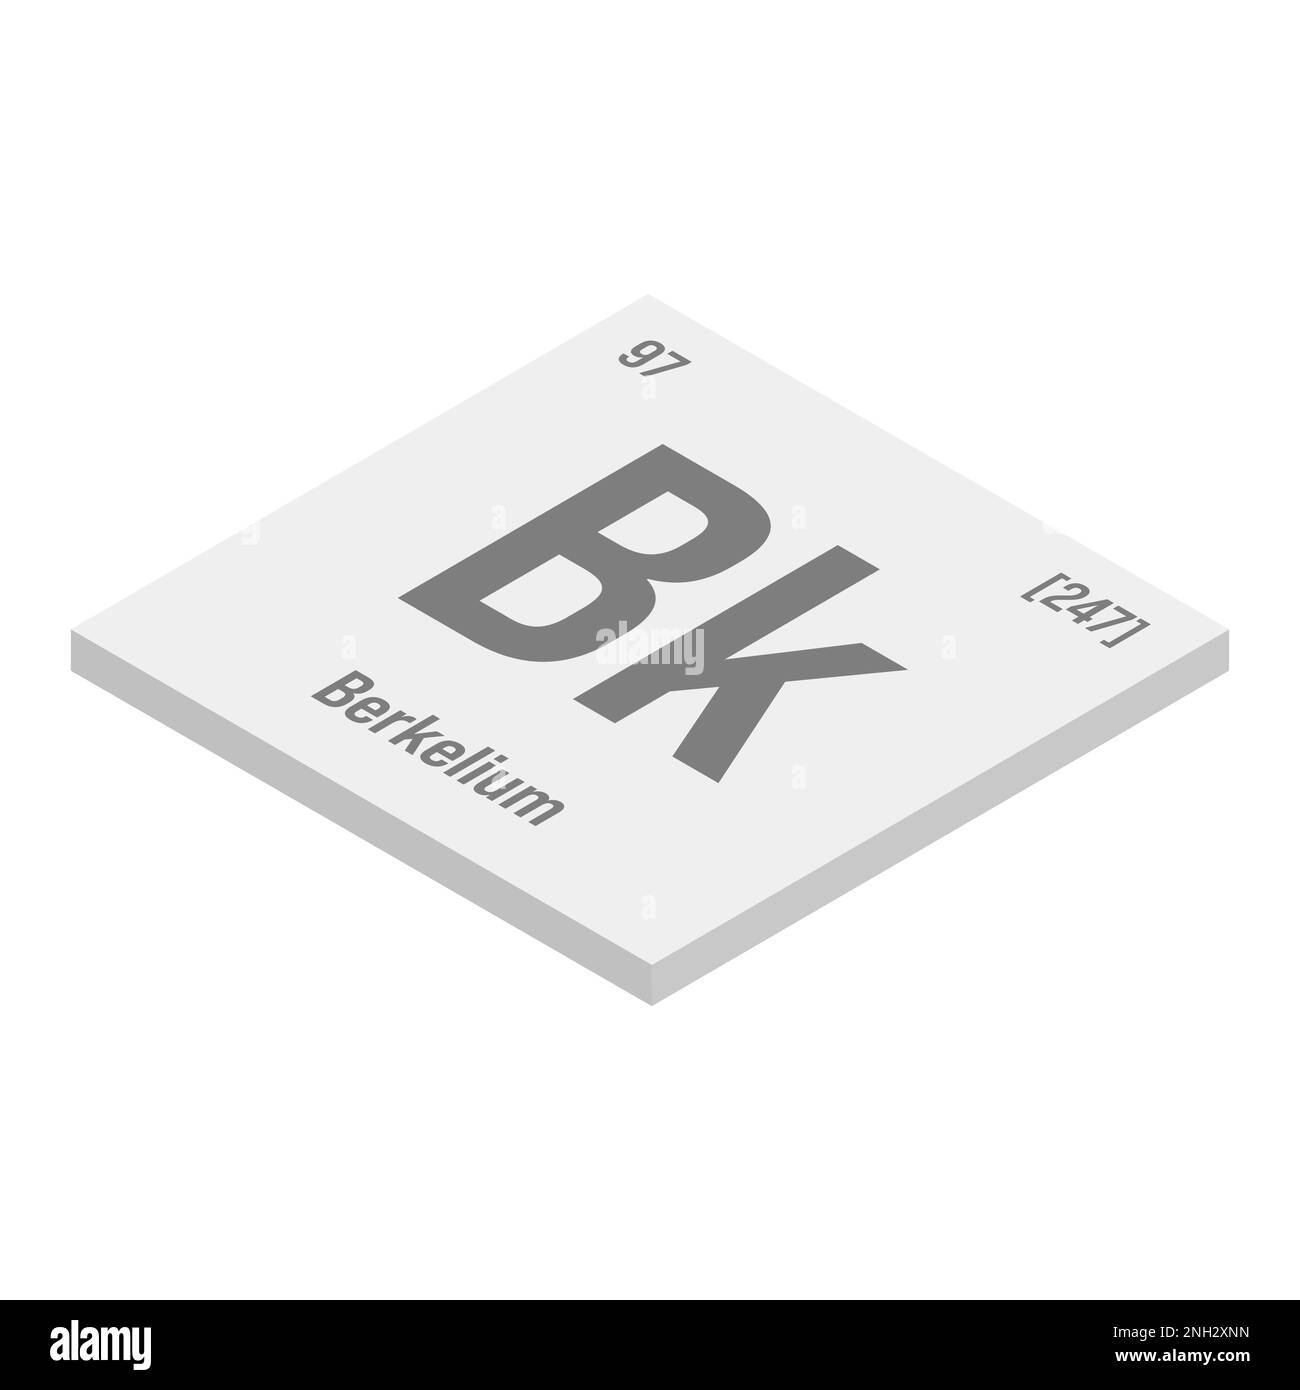 Berkelium, Bk, gray 3D isometric illustration of periodic table element with name, symbol, atomic number and weight. Synthetic radioactive element with potential uses in scientific research and nuclear power. Stock Vector